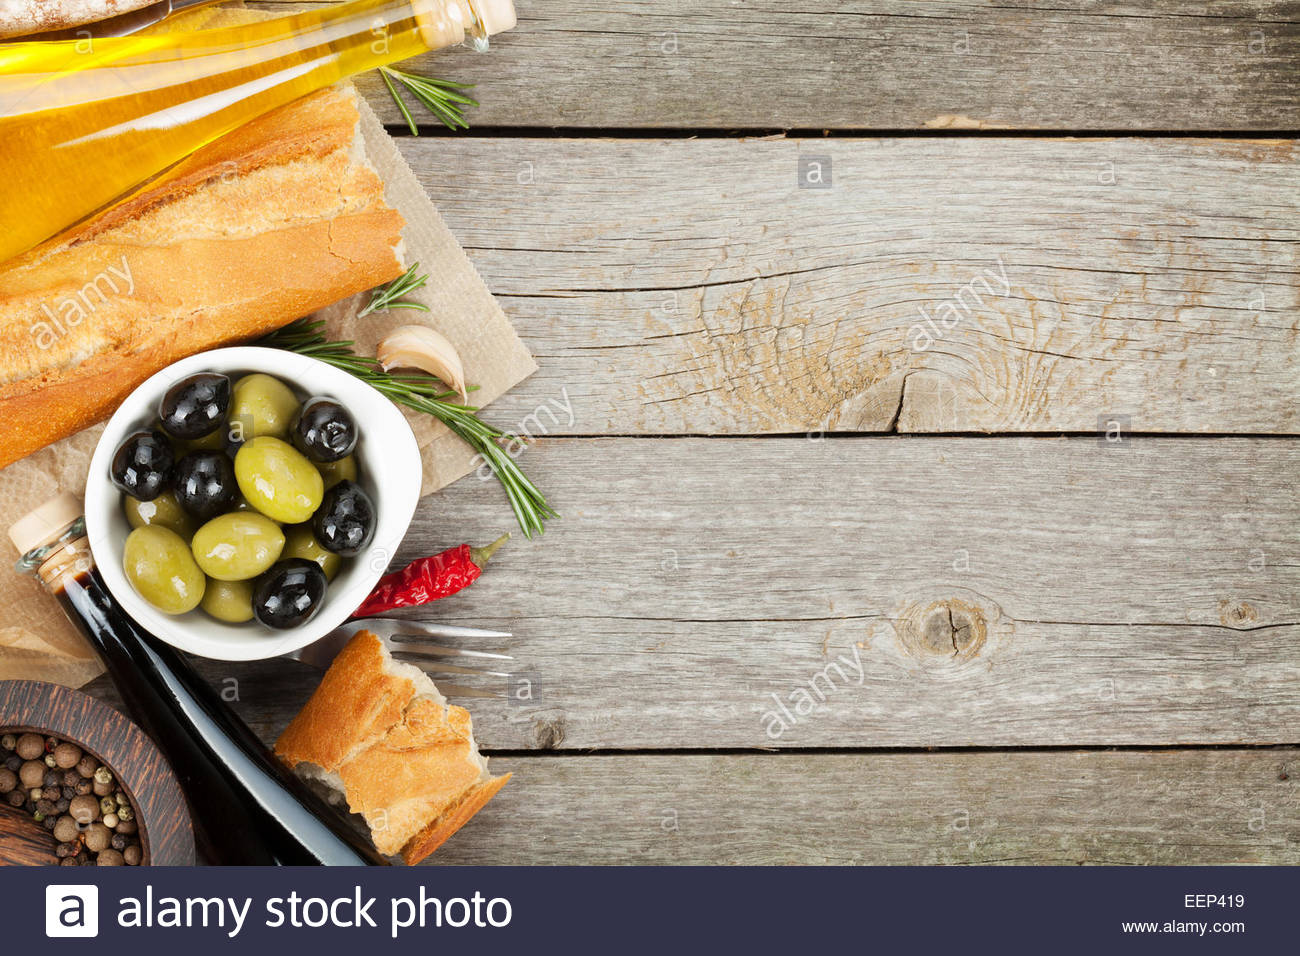 Italian Food Appetizer Of Olives Bread And Spices On Wooden Table